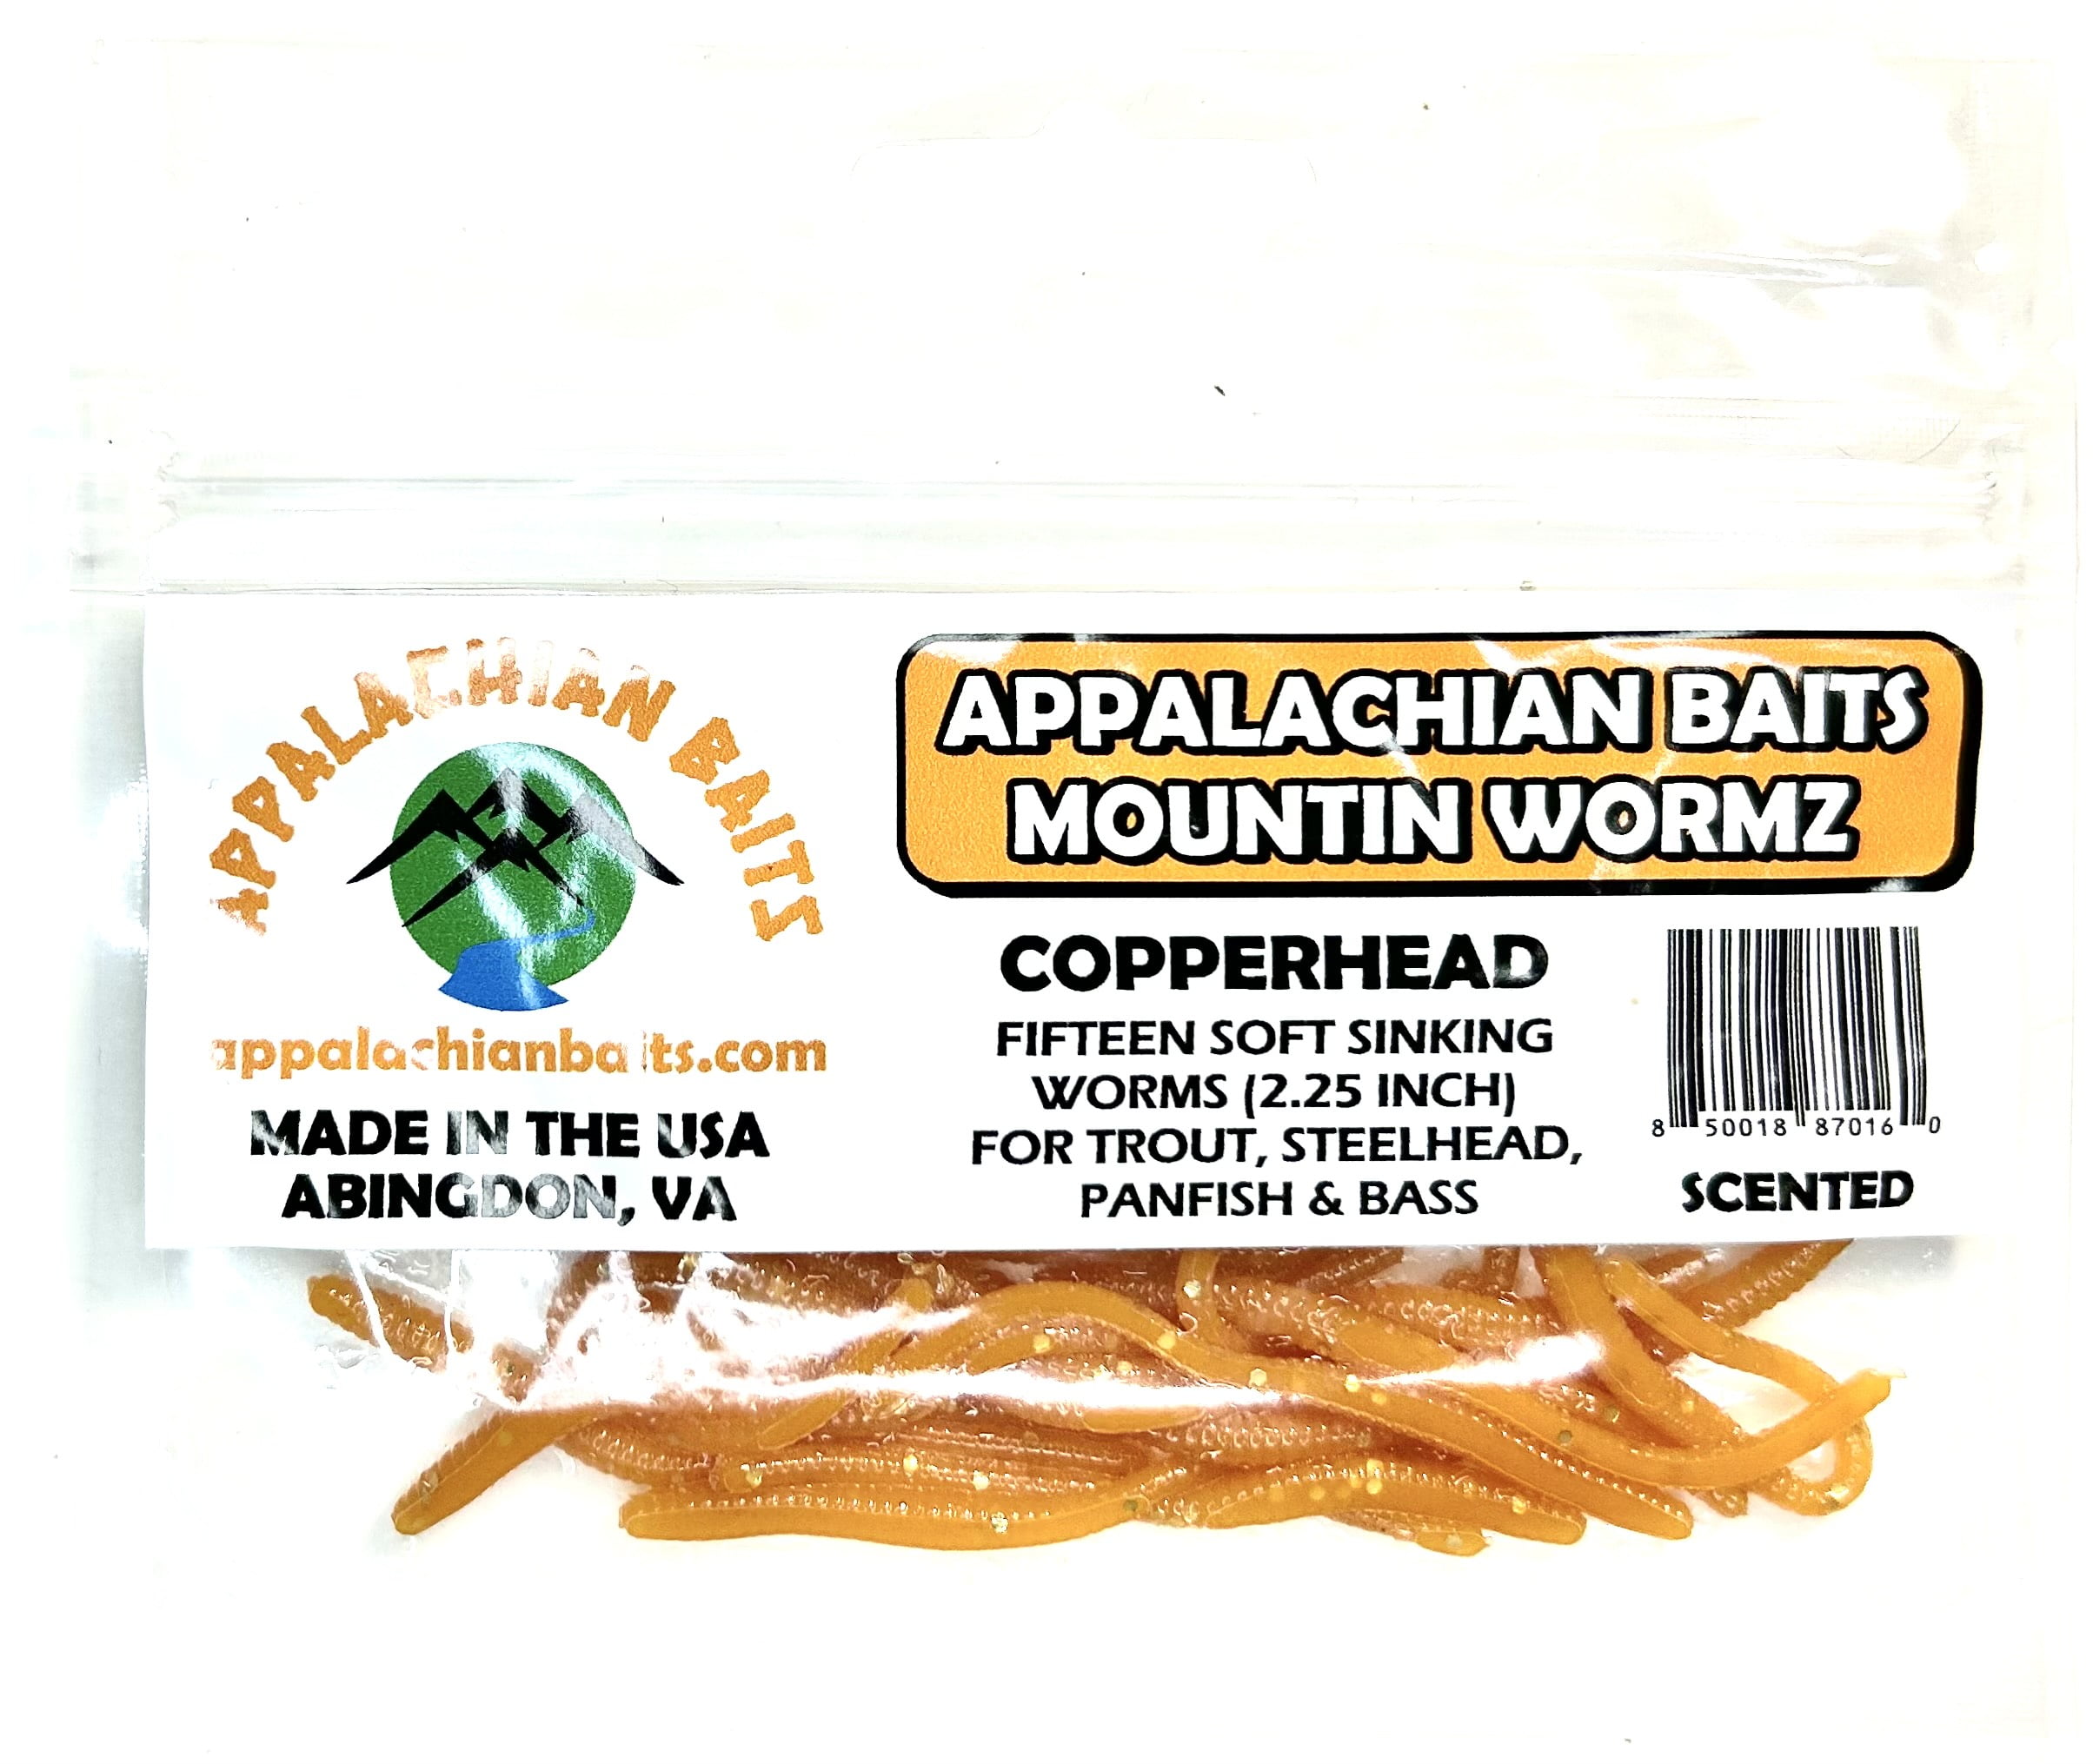 Appalachian Baits Mountin Wormz Copperhead 2 1/4 Soft Sinking Fishing Bait  Worms, Scented, 15 count